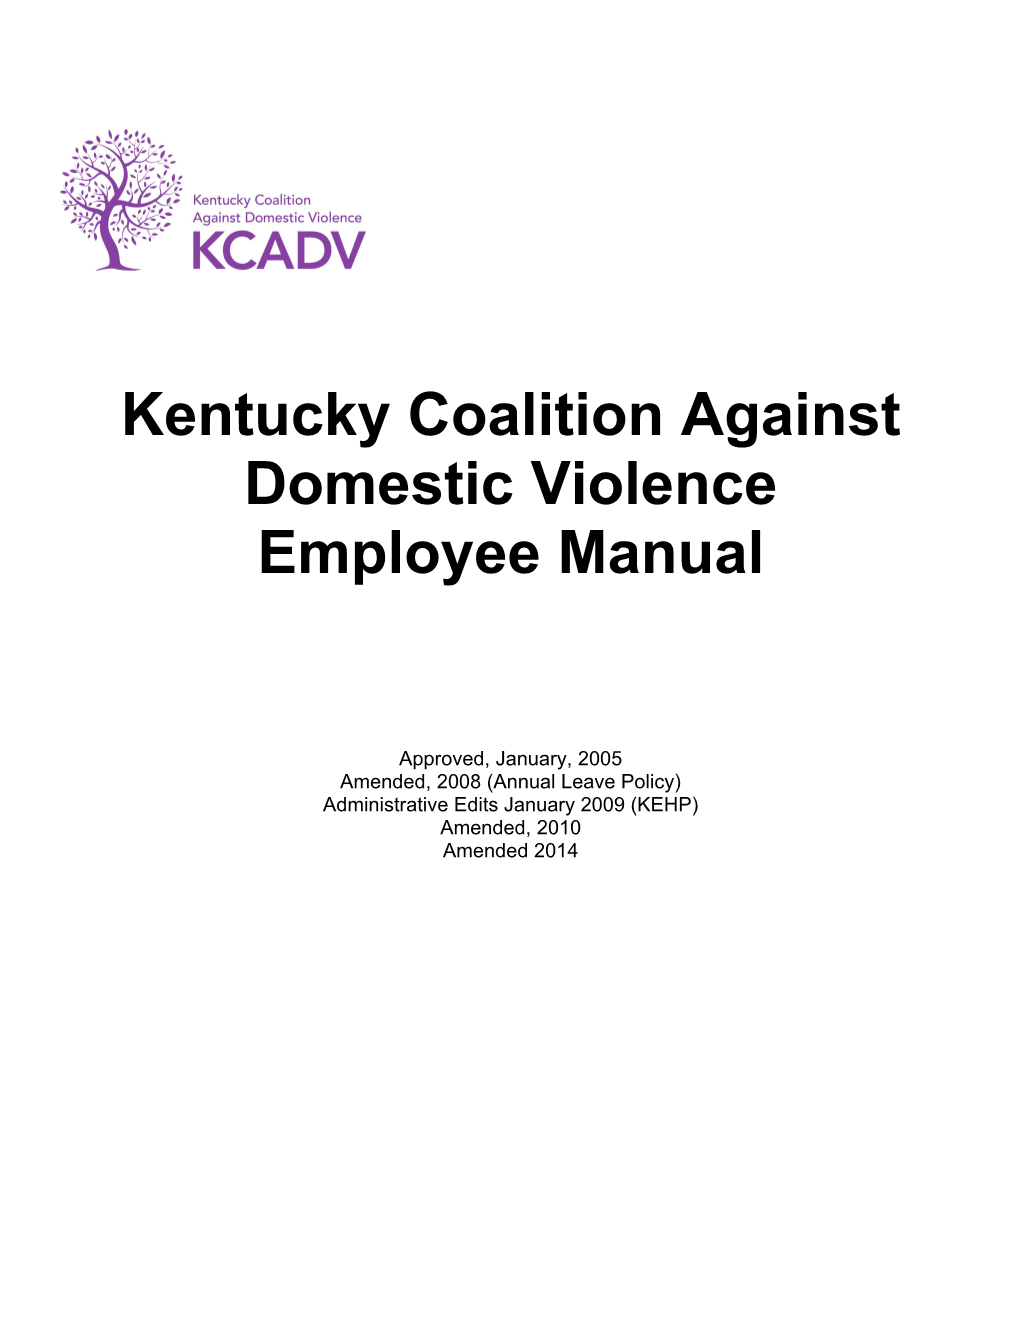 Kentucky Coalition Against Domestic Violence